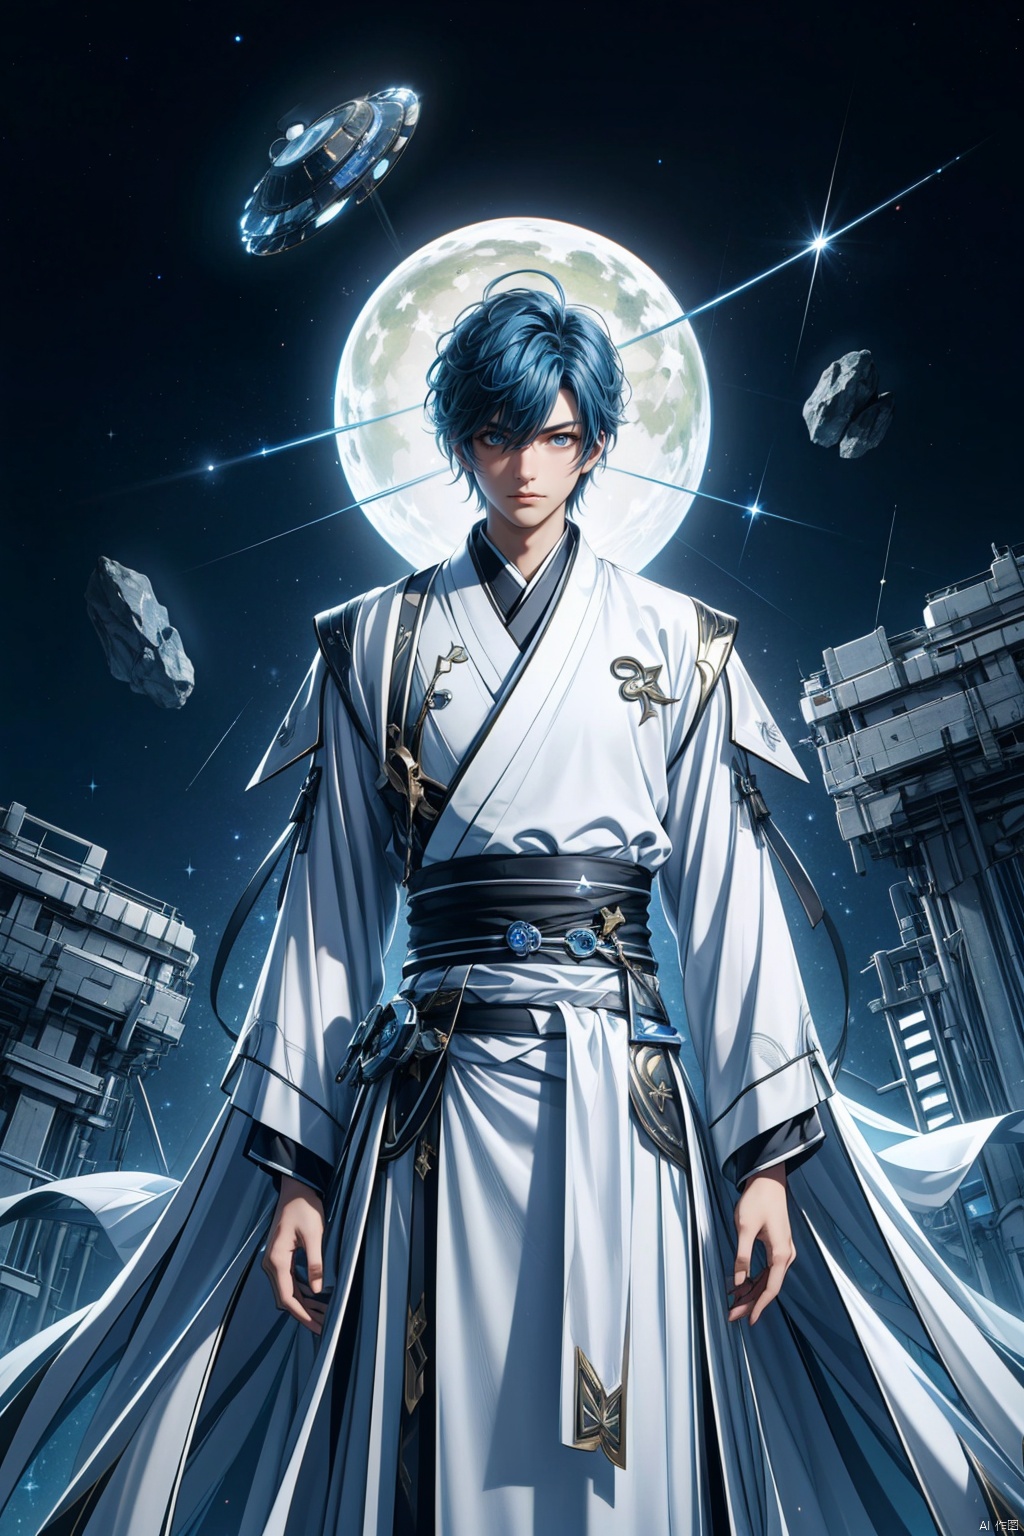  (8k, original photo, best quality, masterpiece: 1.2),1 boy. Blue hair, white and black Hanfu, futuristic robe. Sitting on a research platform floating in the middle of the asteroid belt. A floating meteorite, he was studying with a notebook, surrounded by several asteroids shining with blazing halos. Dramatic lights from distant stars and planets illuminated the scene, casting deep shadows on the Hanfu. The boy looks confident and determined, looking at the vast and mysterious universe with curiosity and respect, with a cowboy lens,Aso

